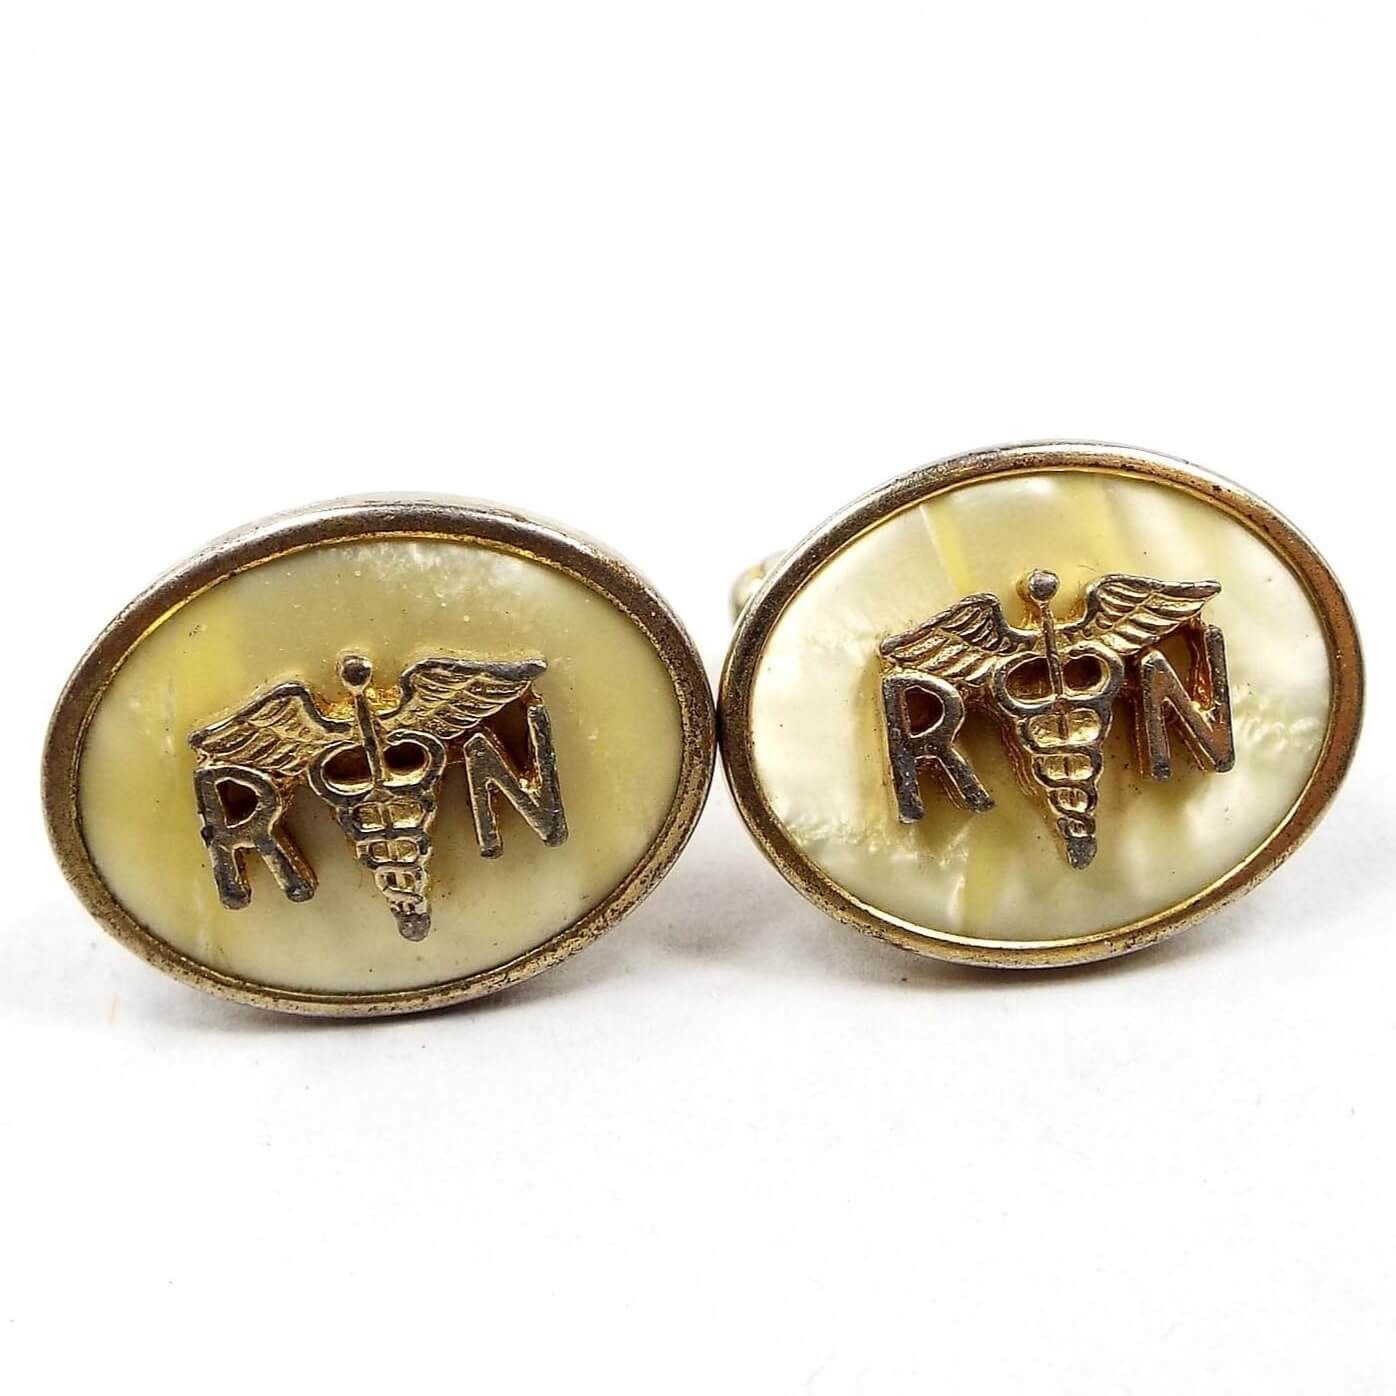 Front view of the Anson Mid Century vintage RN cufflinks. They are oval in shape and the metal is gold tone in color. The inside of the ovals have pearly lucite plastic cabs that are light yellow in color. On top of the lucite cabs is the registered nurse symbol with the letter R and N separated by the Caduceus medical emblem of two snakes entwined around a winged staff. 